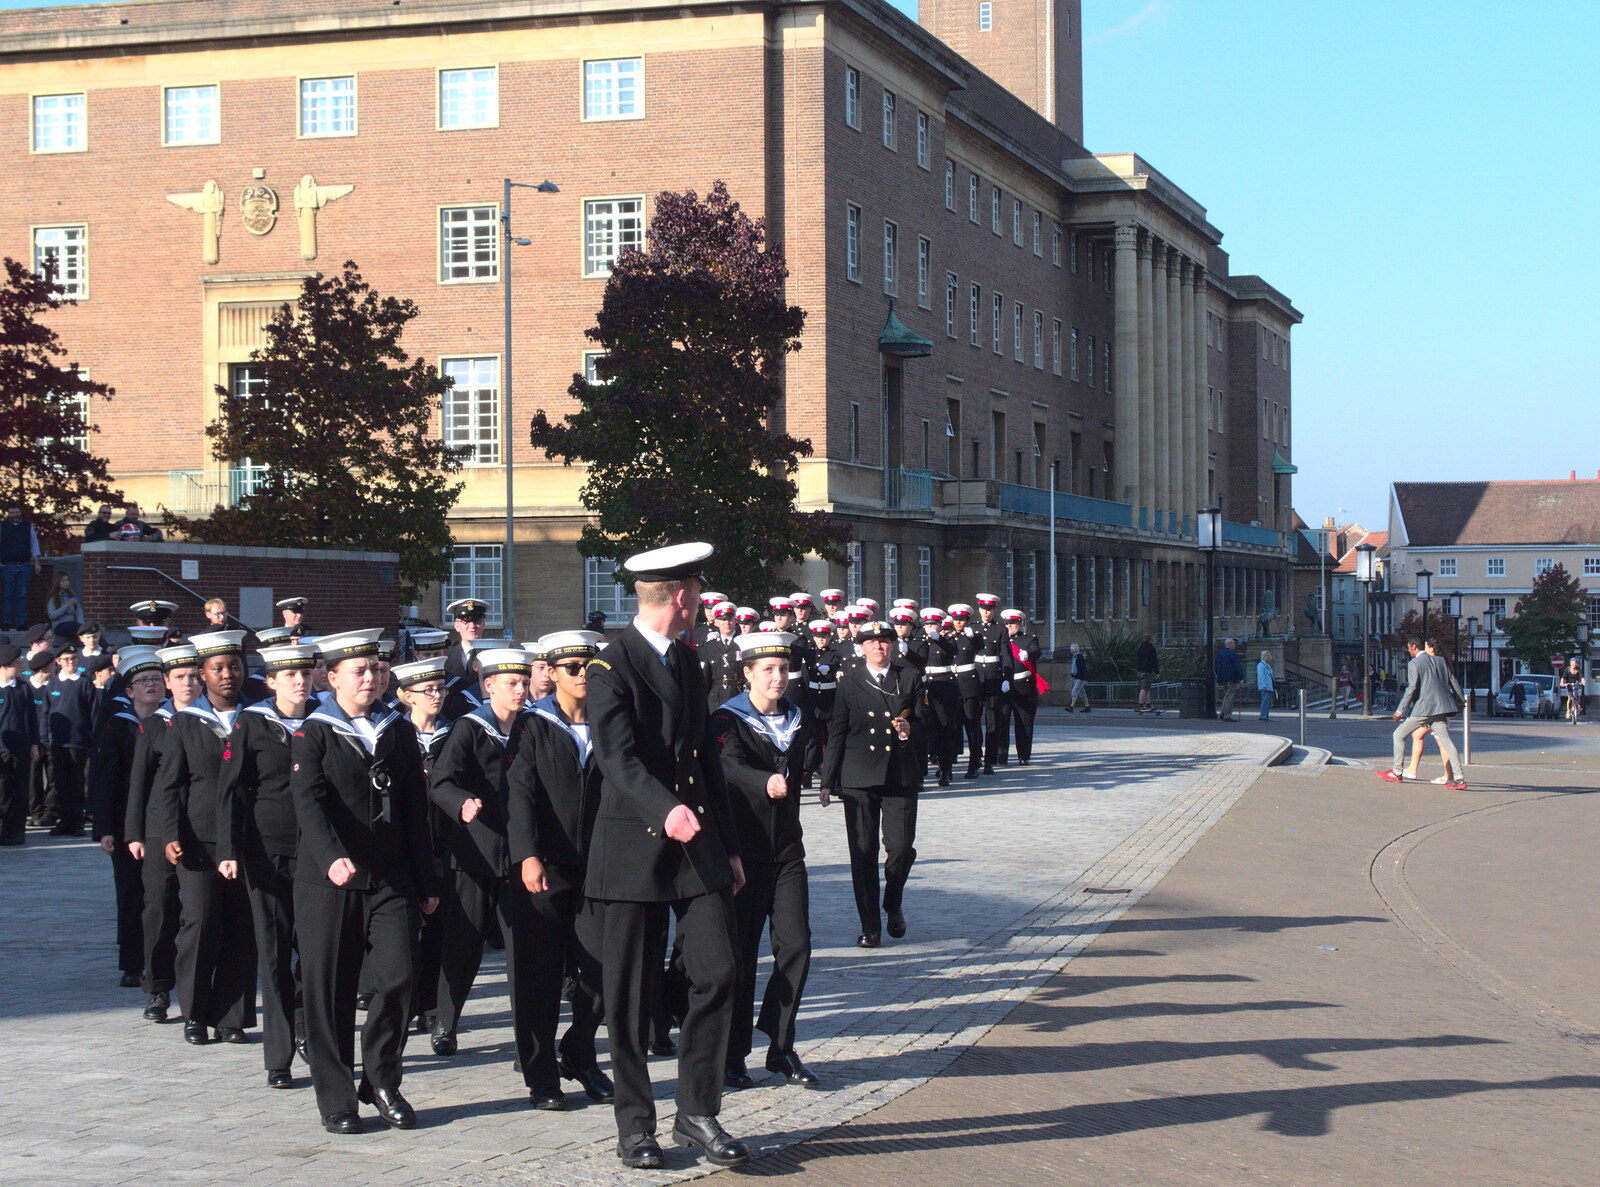 Cadets march off from Trafalgar Day and Pizza, Norwich, Norfolk - 15th October 2017